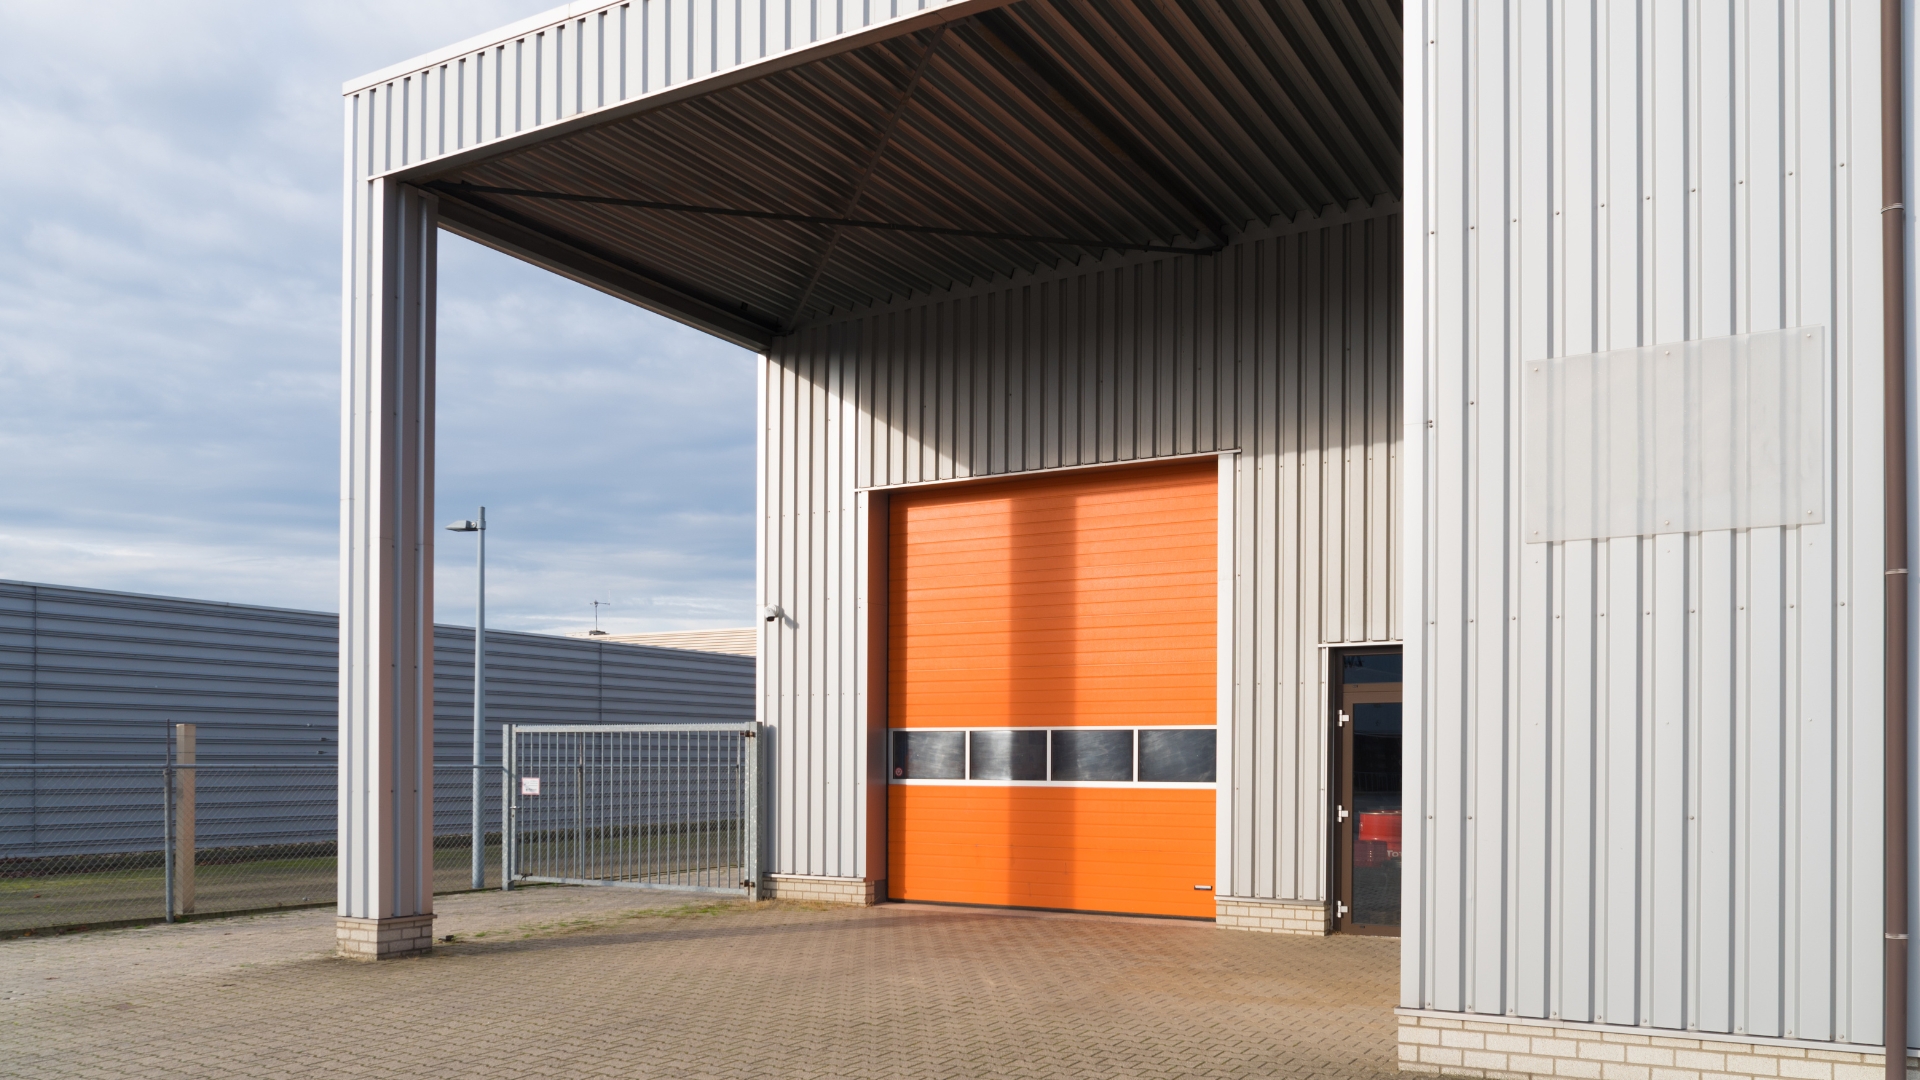 An industrial garage door with customized color and windows